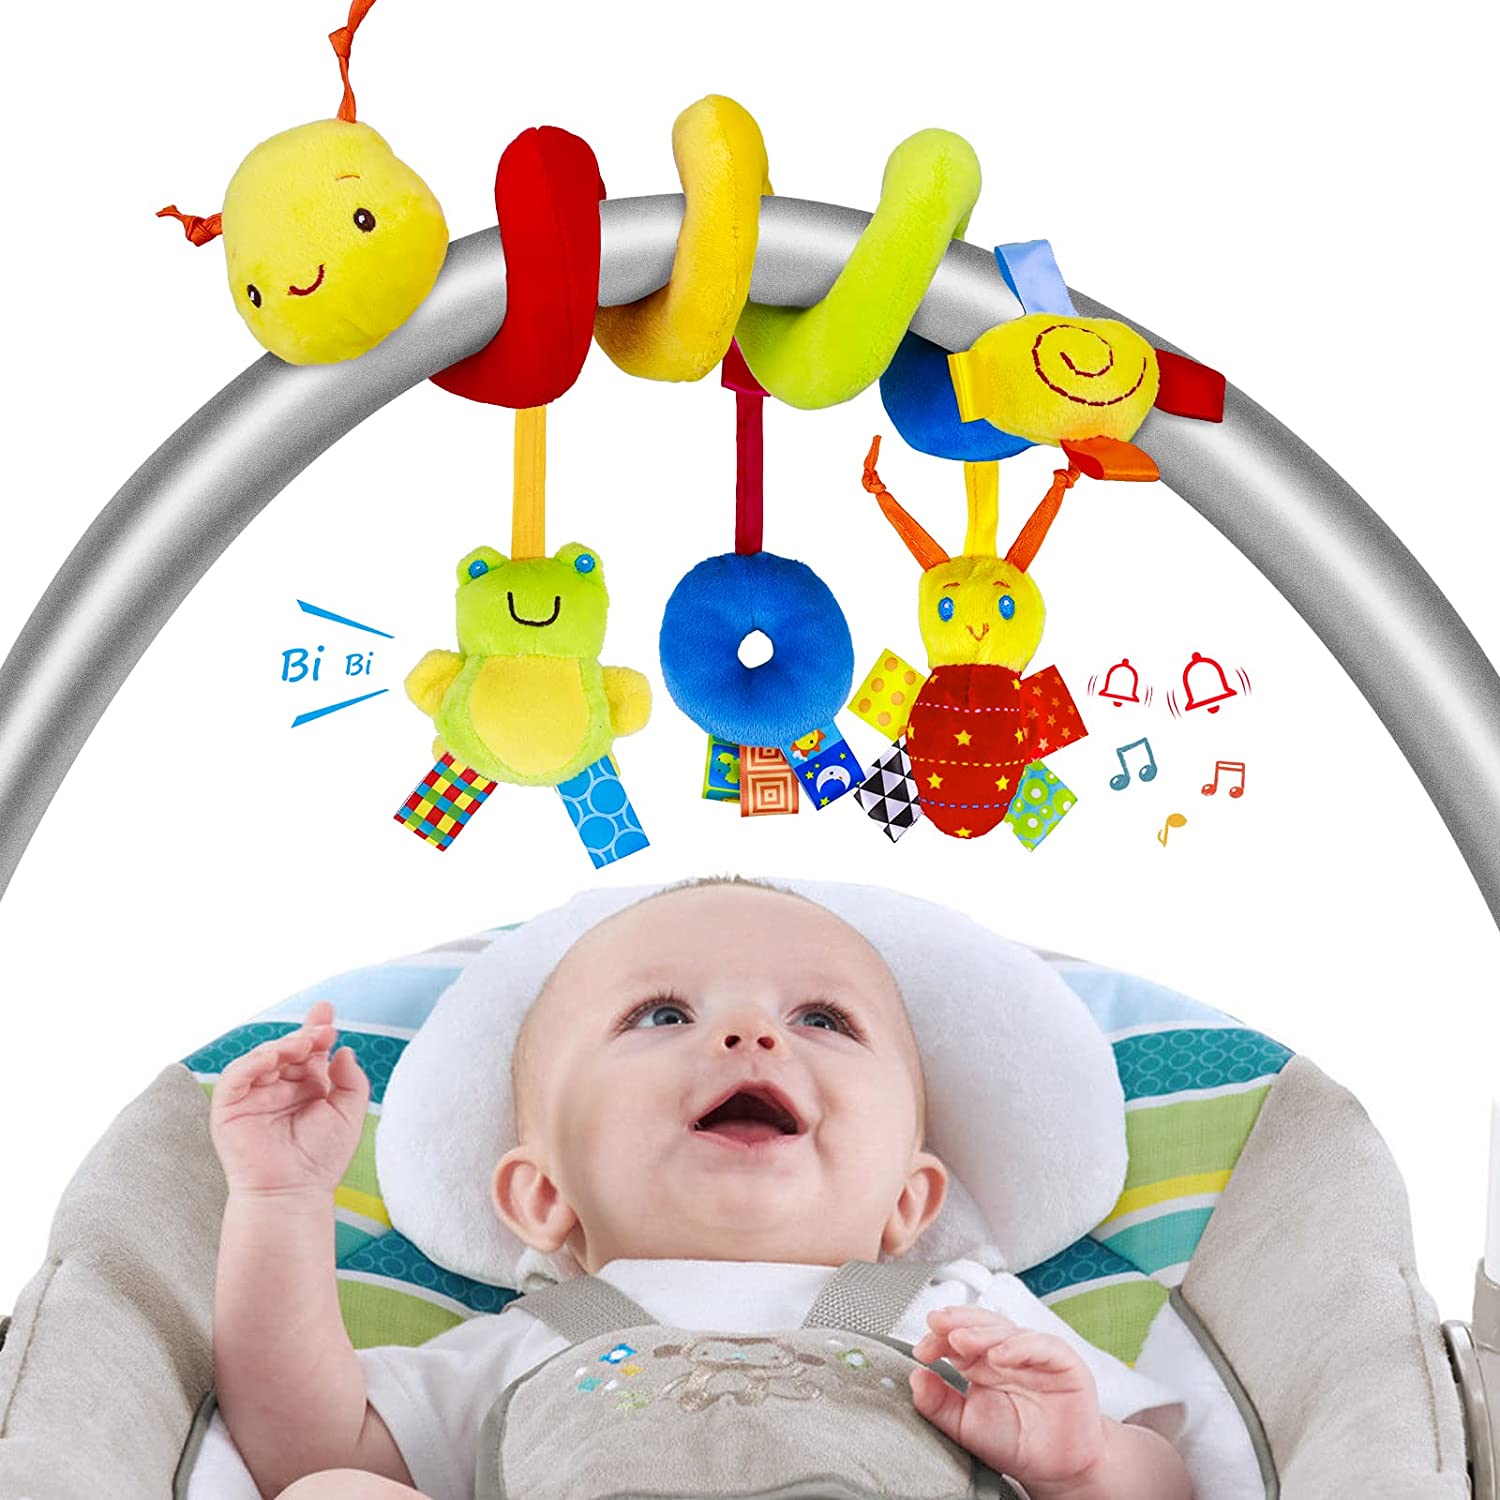 Thriving Toys Baby Spiral Plush Toys, Car Seat Activity Toys, Baby Hanging Toys for Crib Bar Bassinet Stroller Best Gift for Kids Infant Newborn 0-12 Months